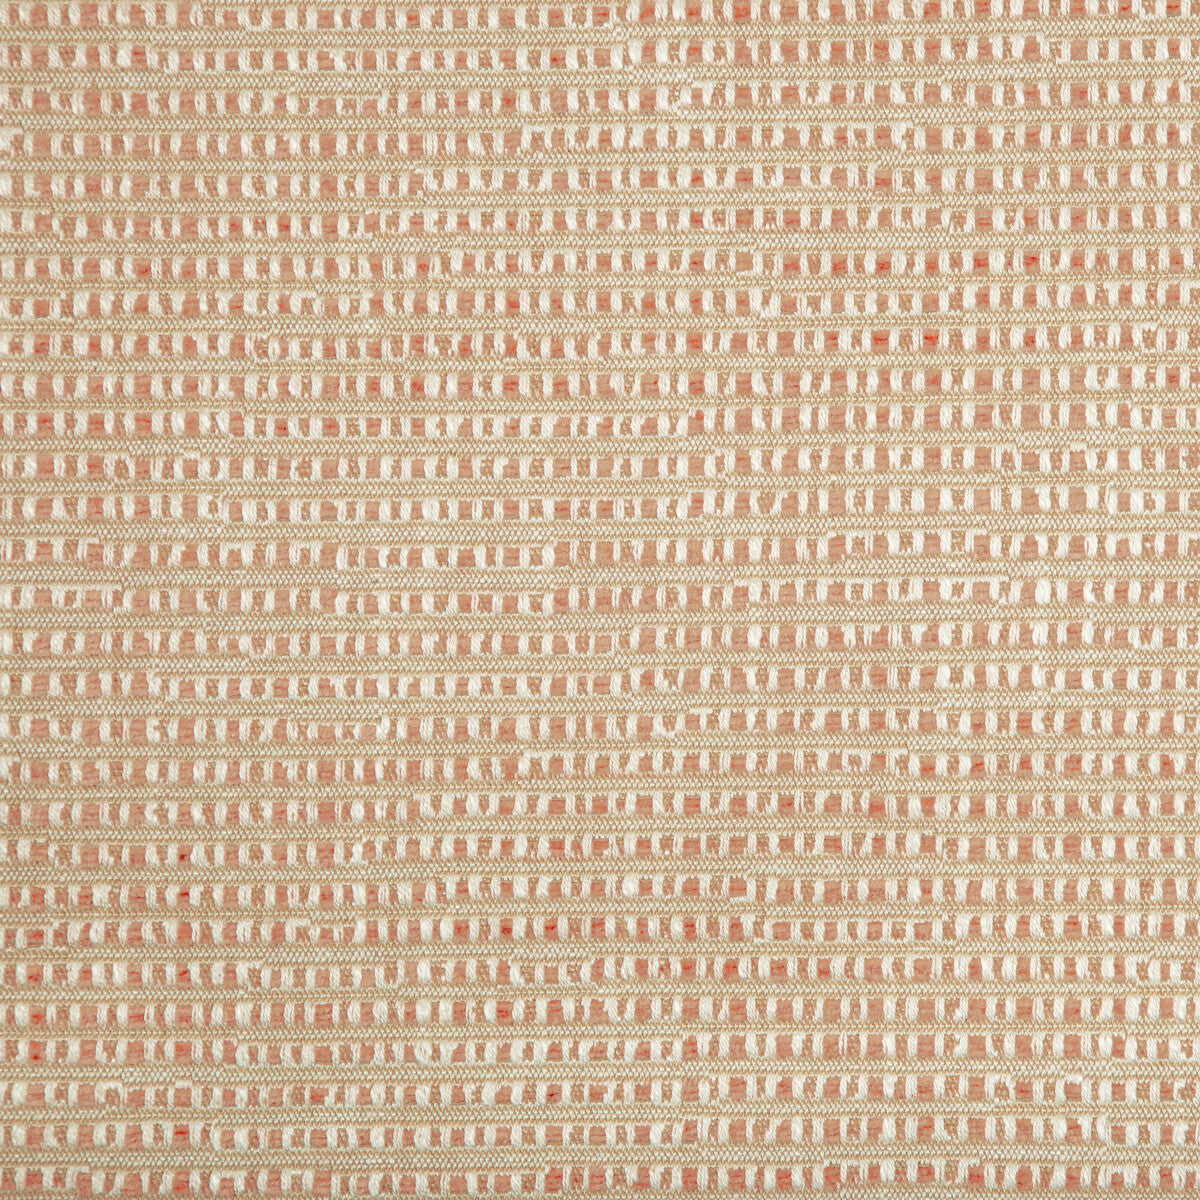 Stissing fabric in faded petal color - pattern 2019156.127.0 - by Lee Jofa in the Carrier And Company collection